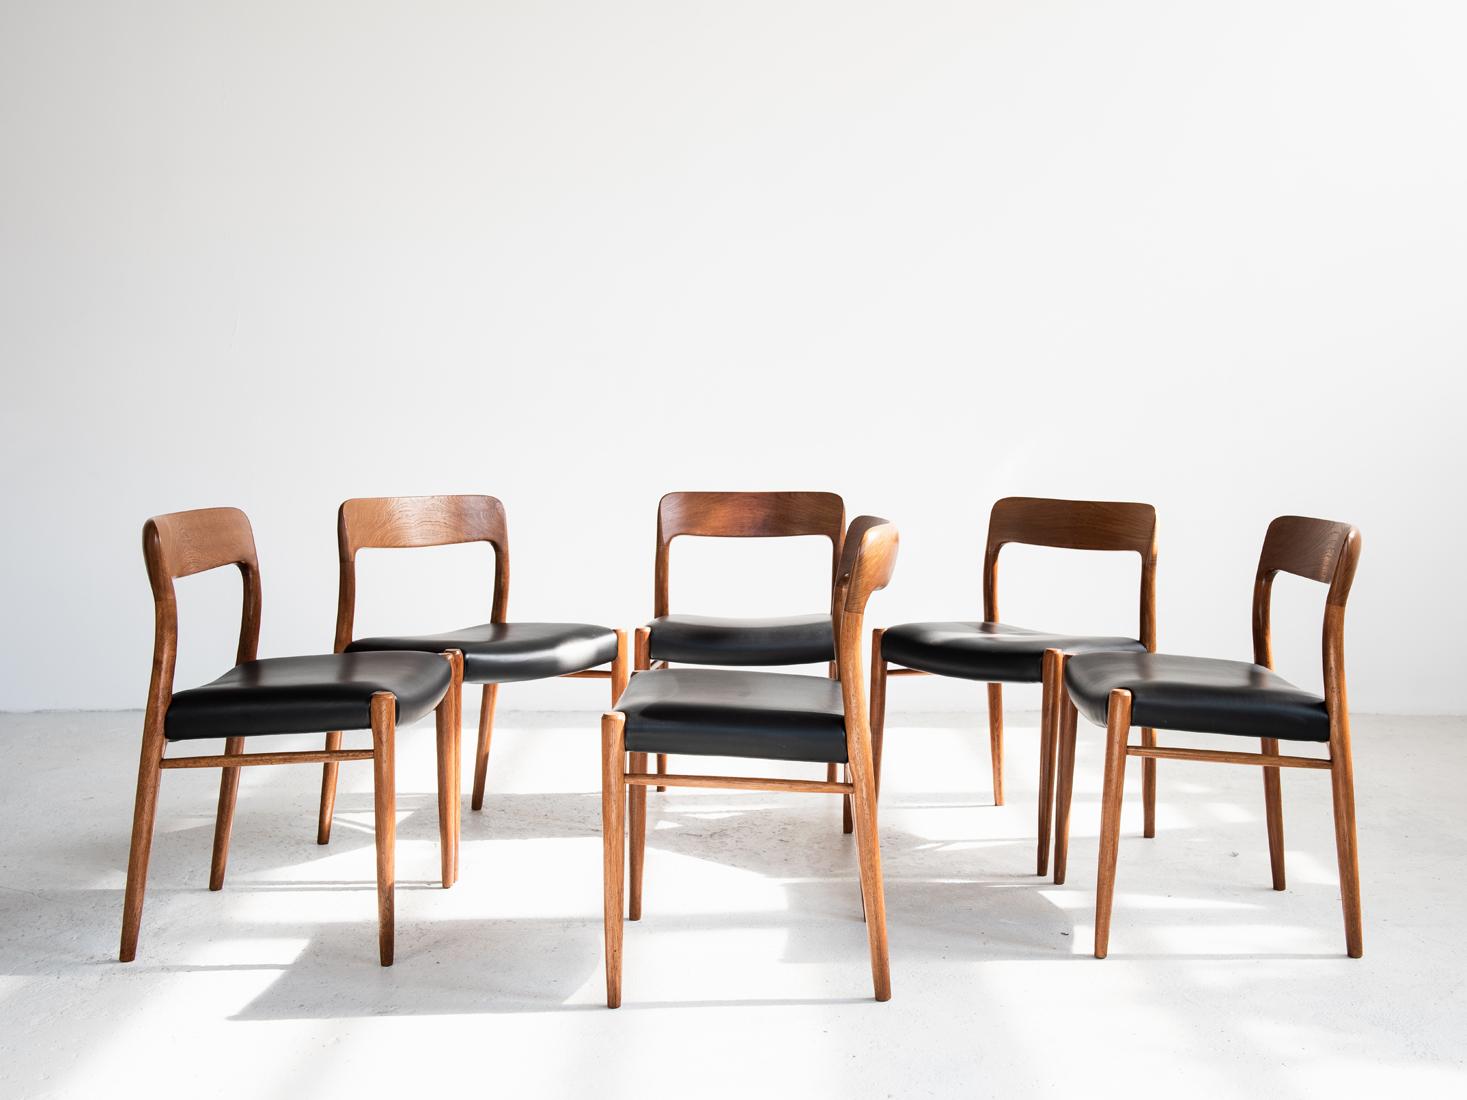 Dyed Midcentury Danish Set of 6 Chairs in Teak and Leather by Møller